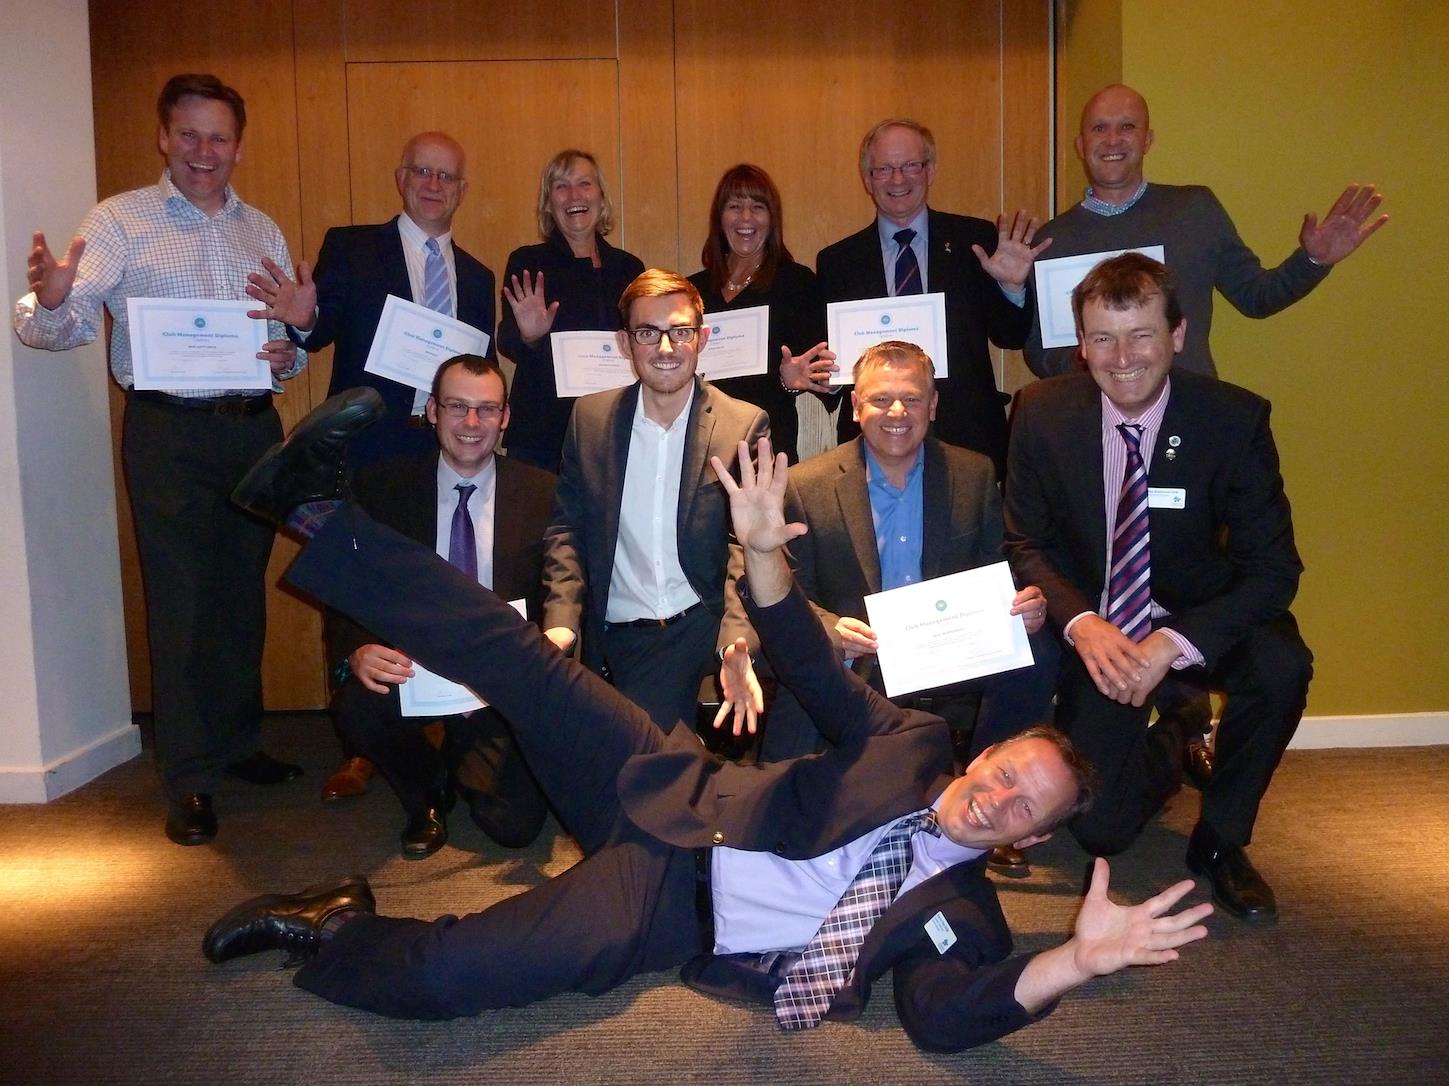 Pictured – The Diploma recipients with Kevin Fish (centre) and Michael Braidwood, CMAE’s Director of Education, front right